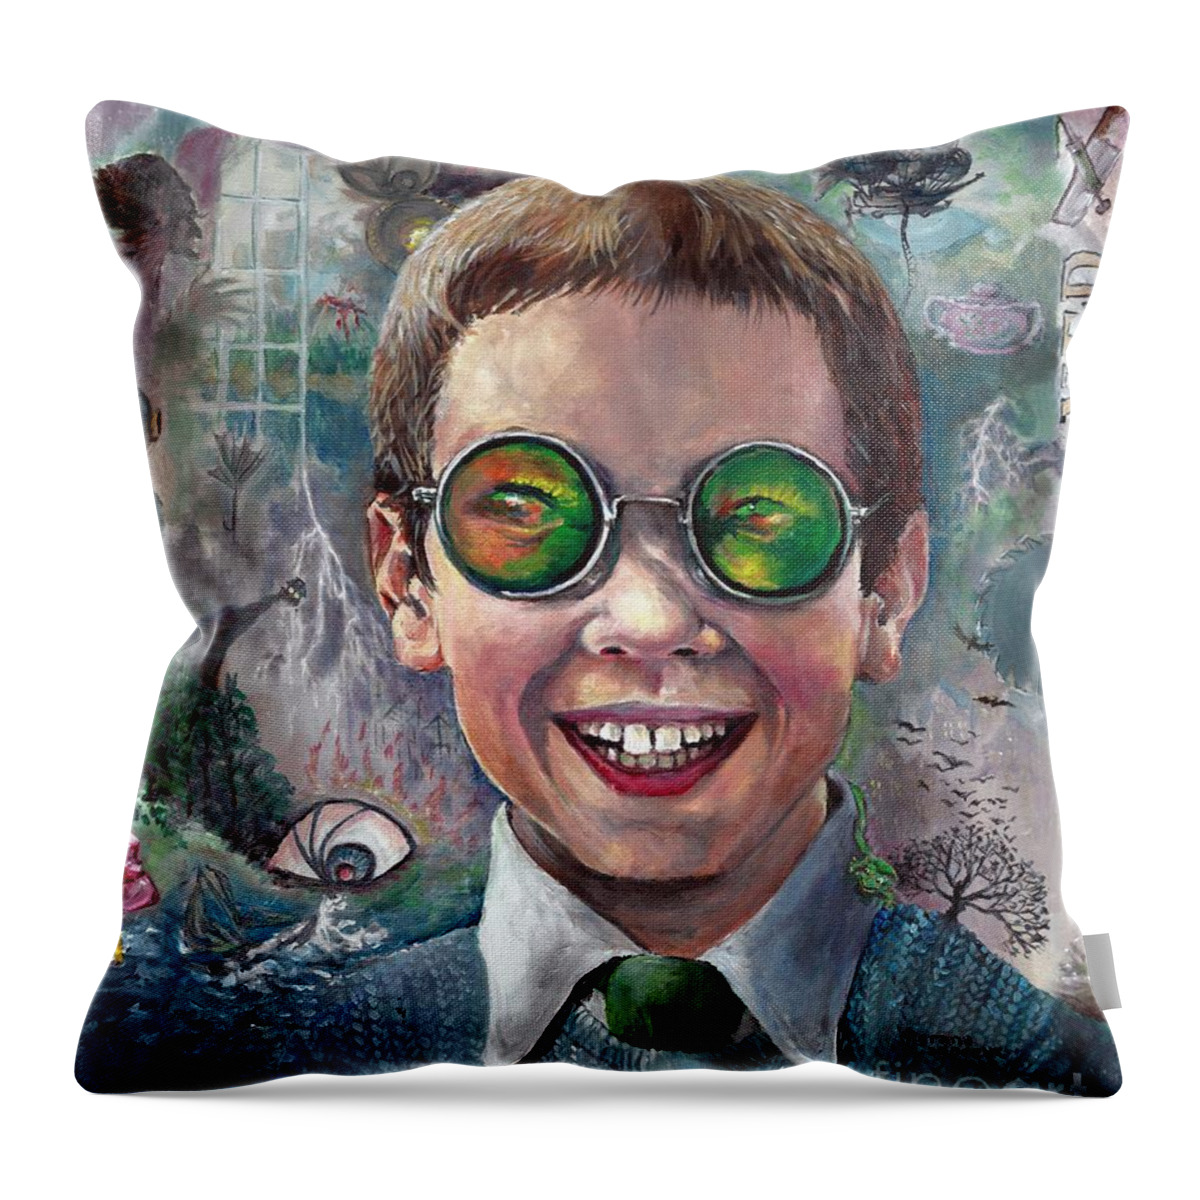 Lemony Snicket Throw Pillow featuring the painting Look Away by Merana Cadorette